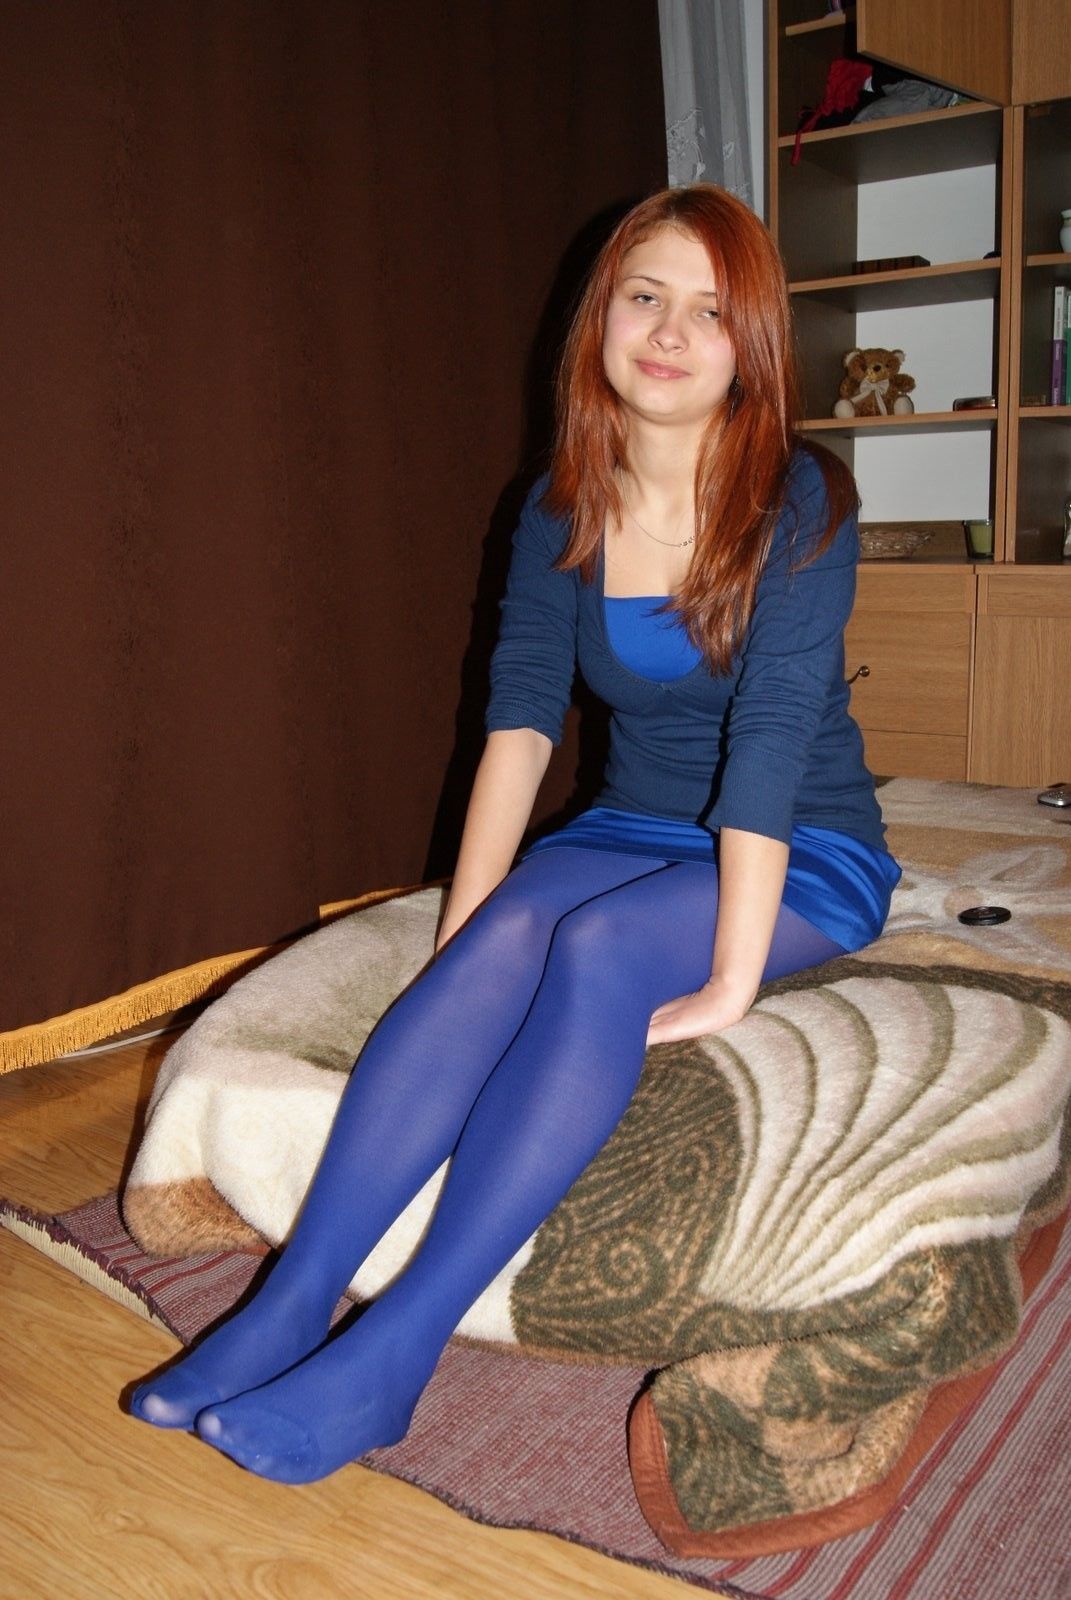 Women`s Legs And Feet In Tights Legs And Feet In Blue Tights 42